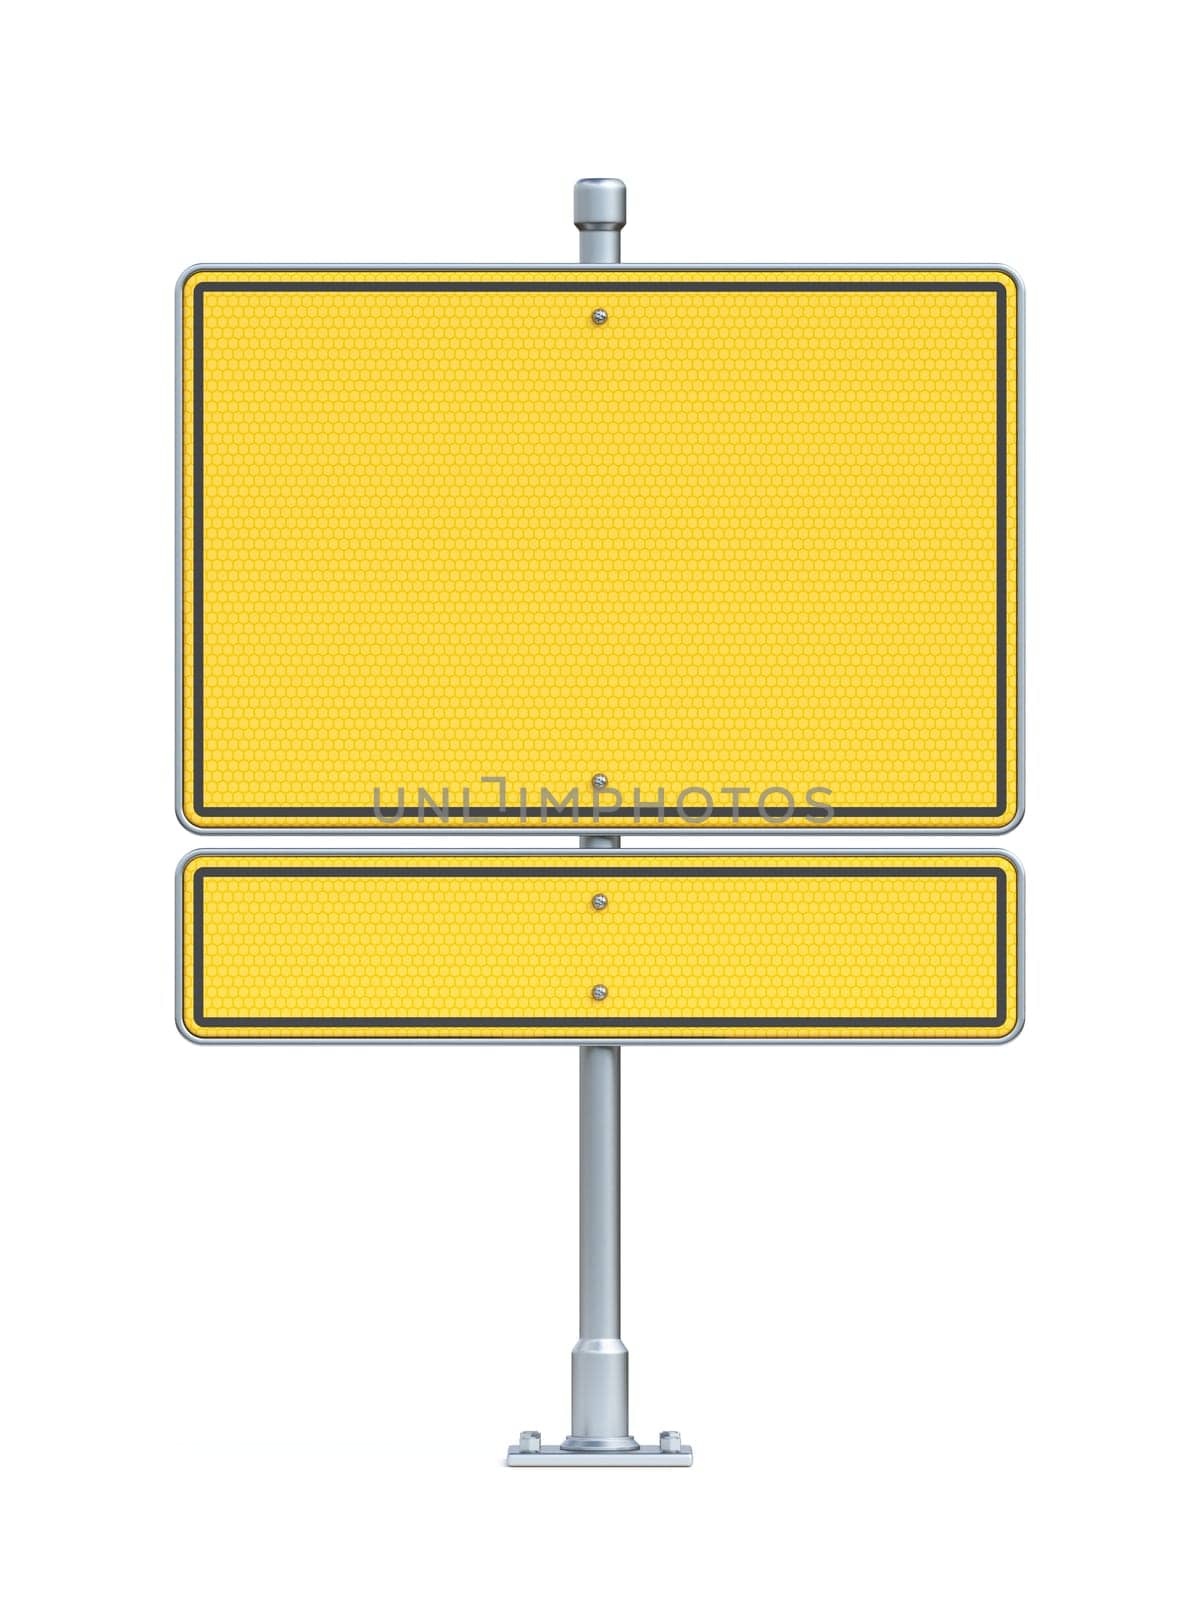 Blank yellow traffic sign board two part 3D rendering illustration isolated on white background